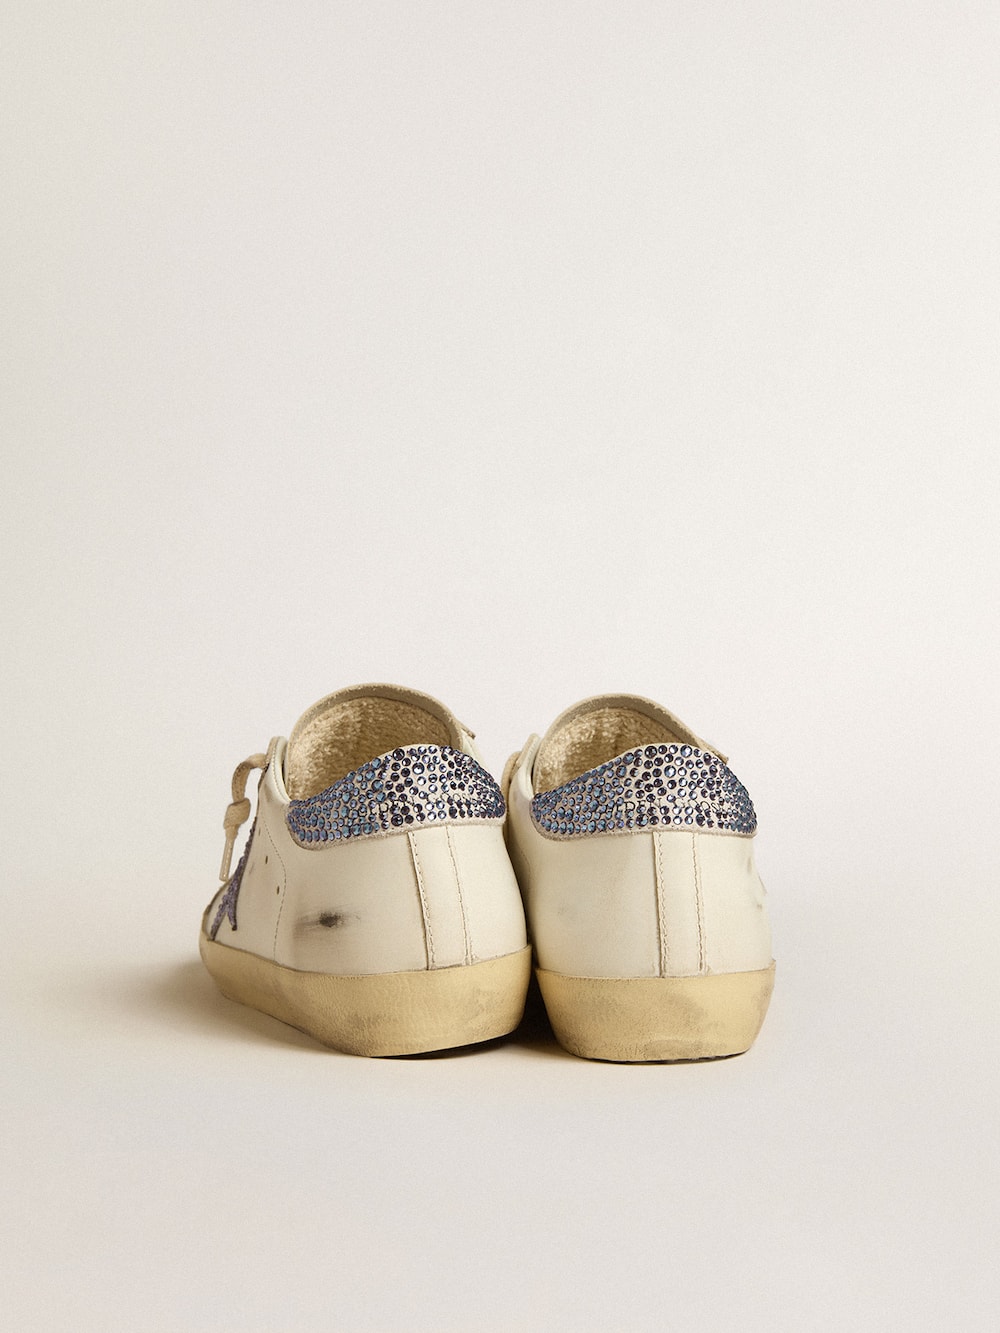 Golden Goose - Women’s Super-Star LTD with suede star and heel tab with Swarovski crystals in 